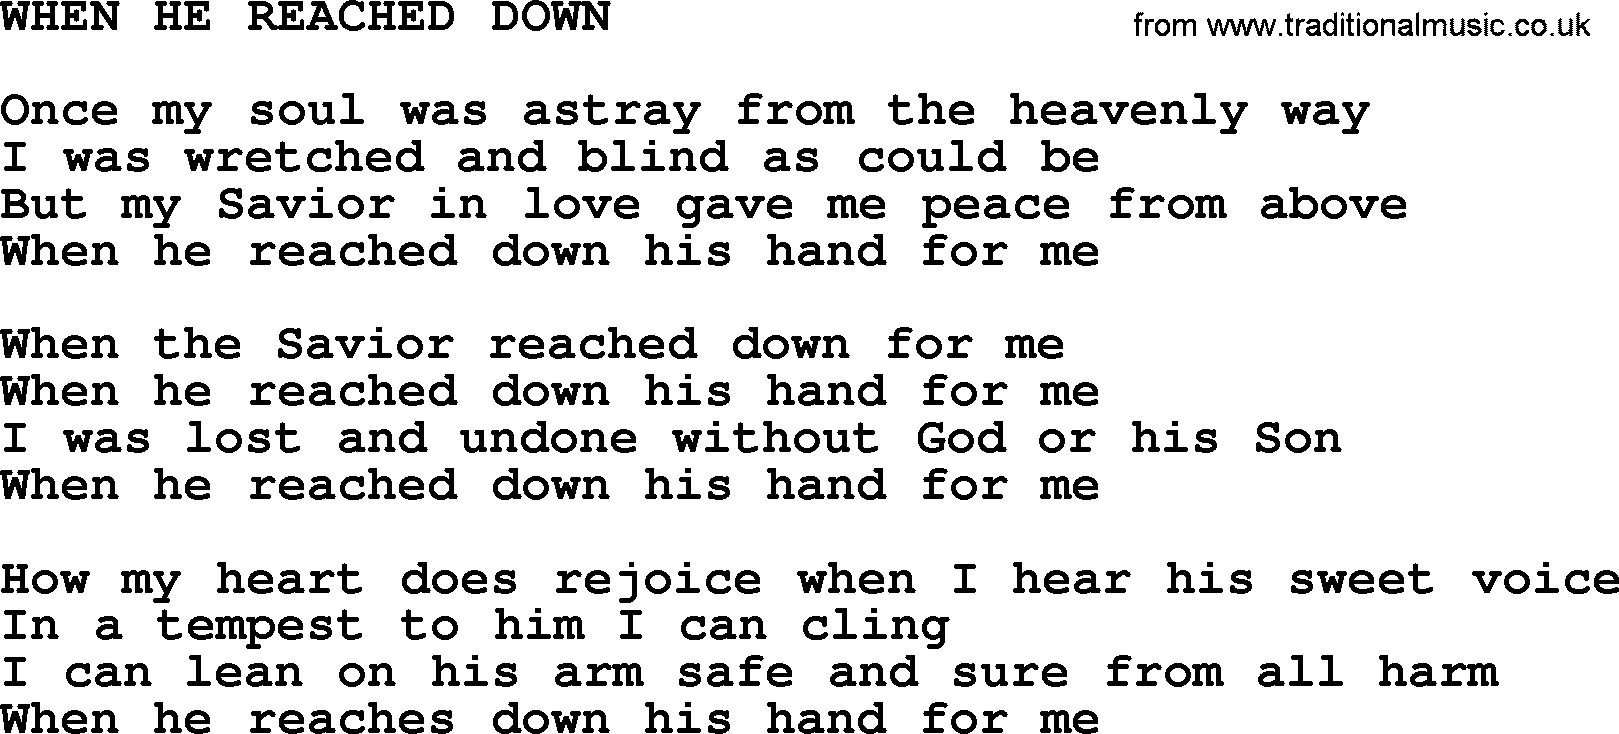 Johnny Cash song When He Reached Down.txt lyrics